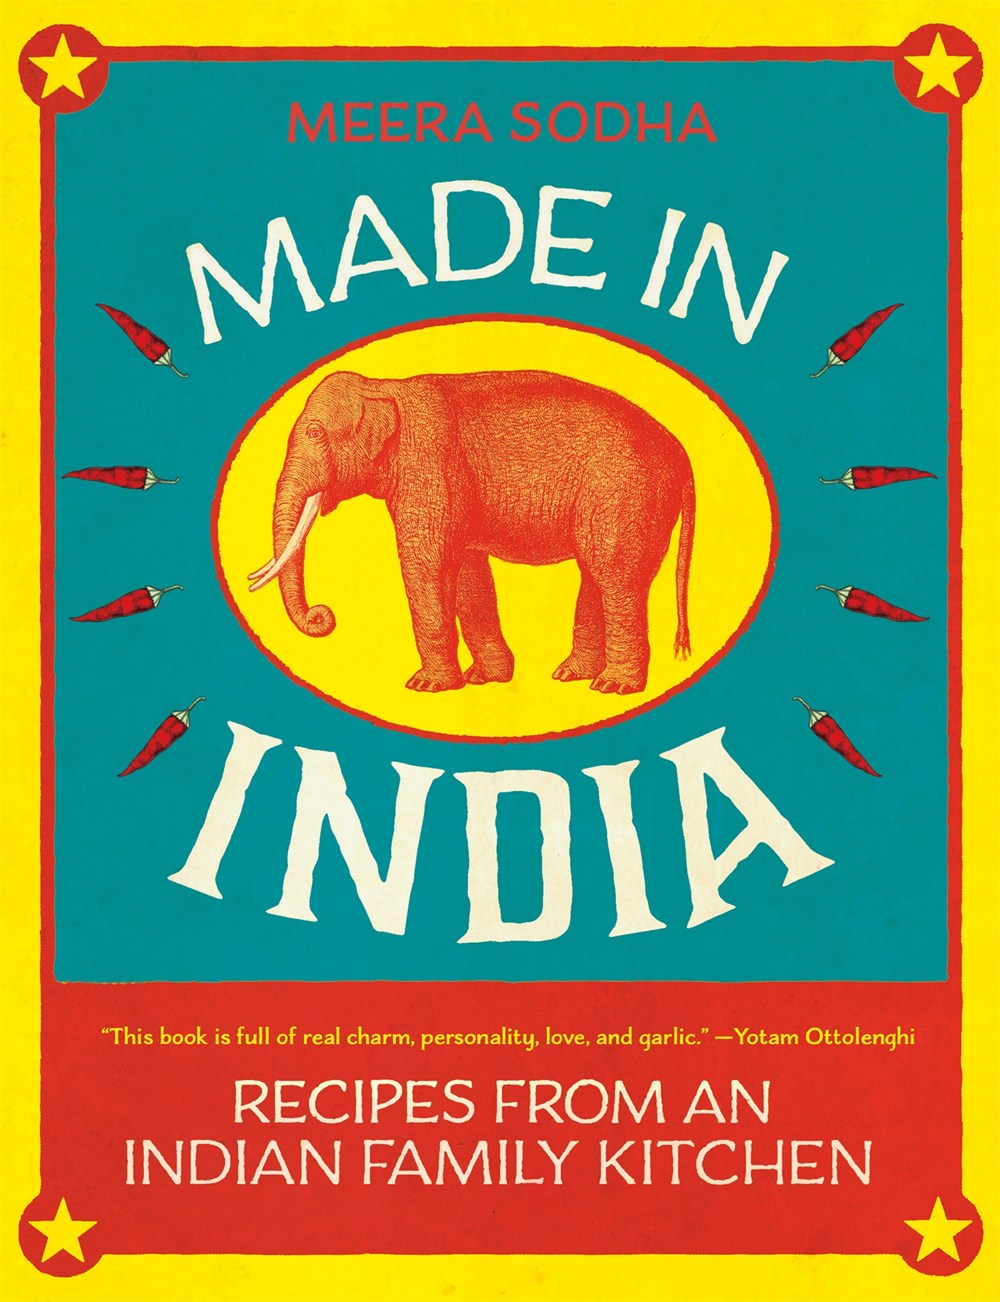 Made In India: Recipes from an Indian Family Kitchen by Meera Sodha